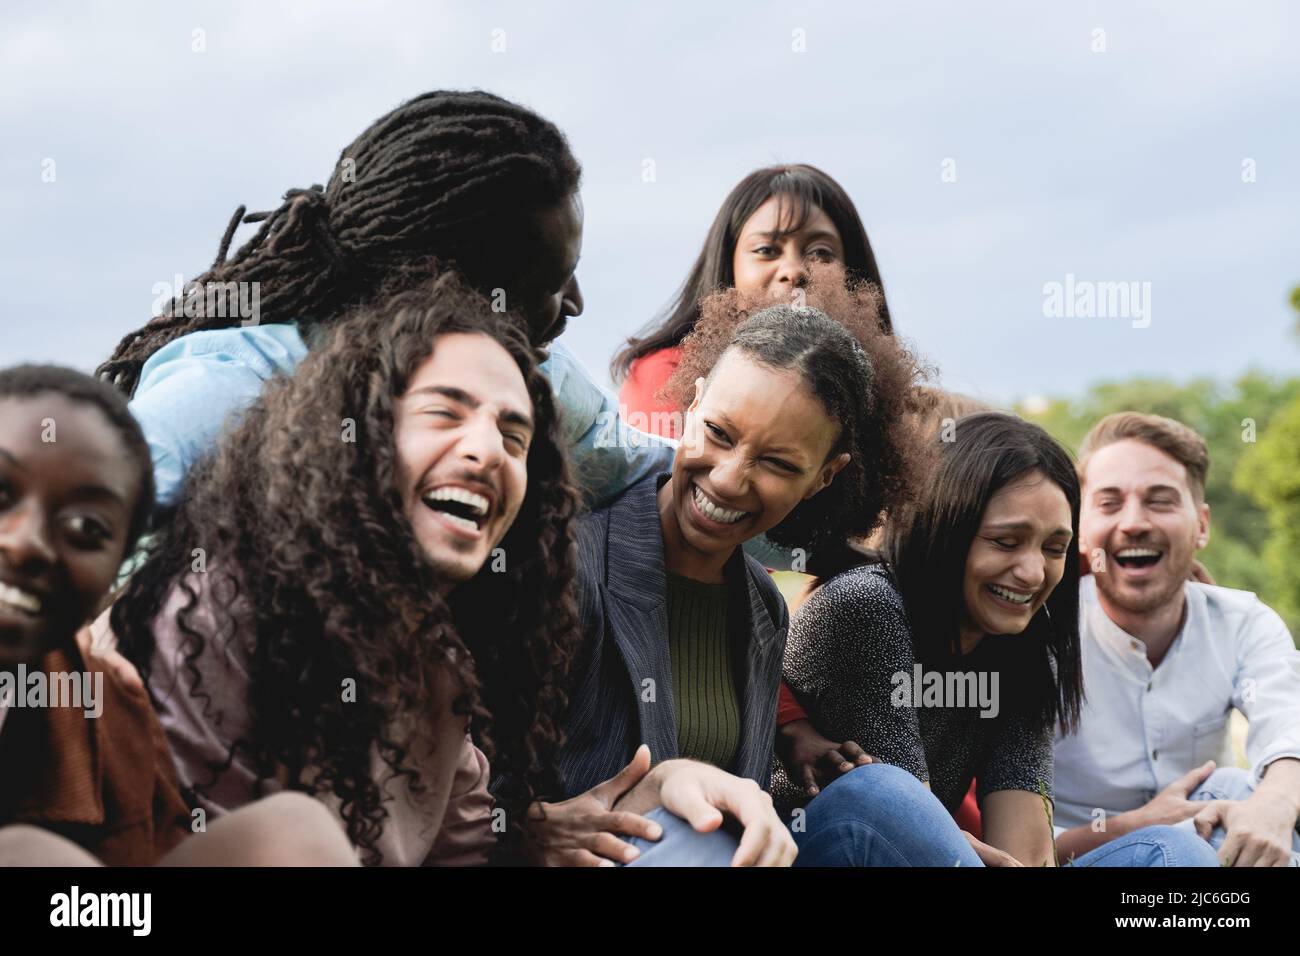 Multiethnic happy group of people having fun outdoor - Focus on center African girl face Stock Photo